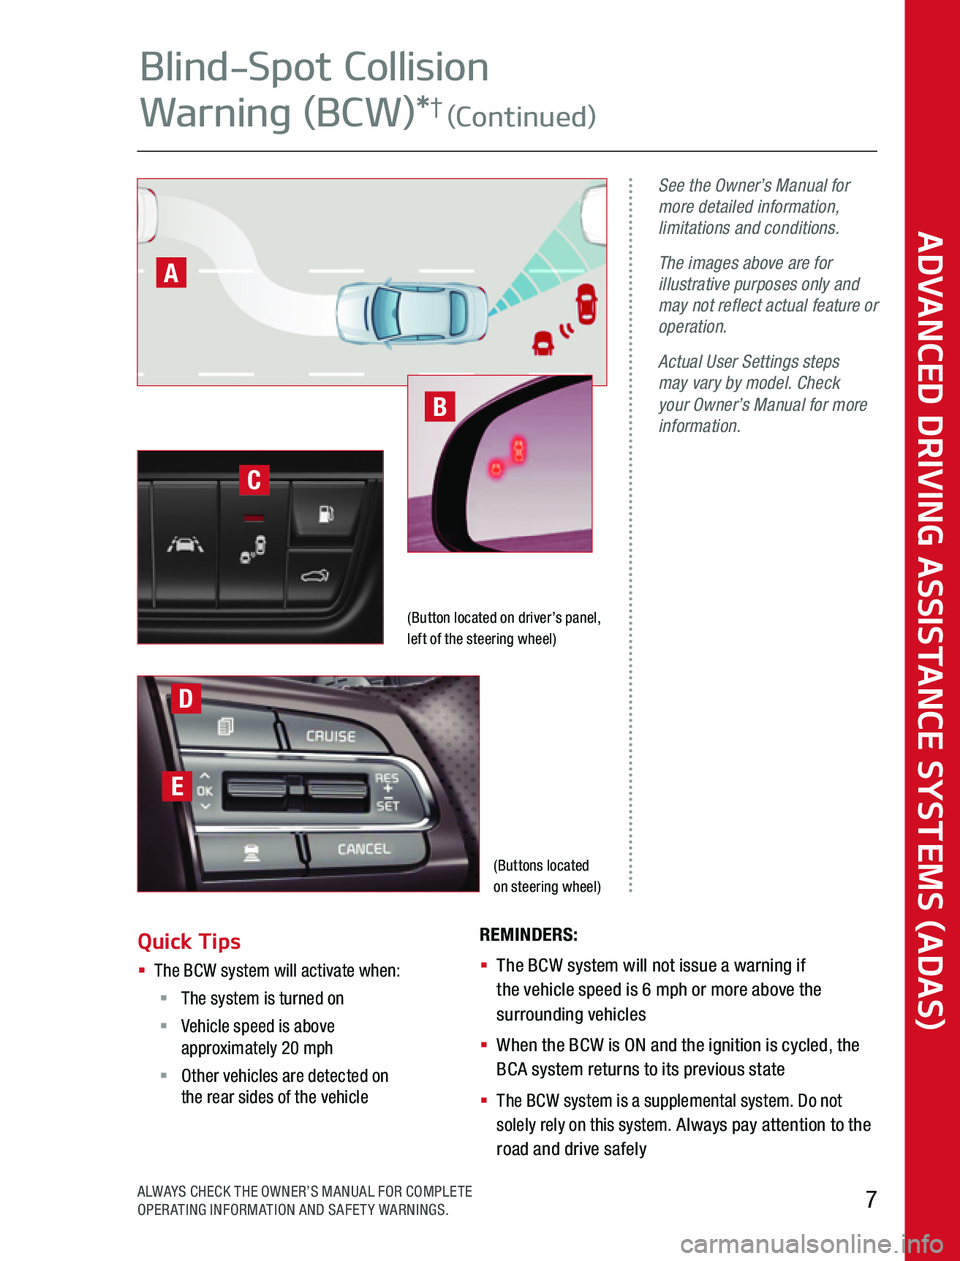 KIA OPTIMA 2020  Advanced Driving Assistance System (Buttons located  on steering wheel)
See the Owner’s Manual for more detailed information, limitations and conditions.
The images above are for illustrative purposes only and may not reflect actual 